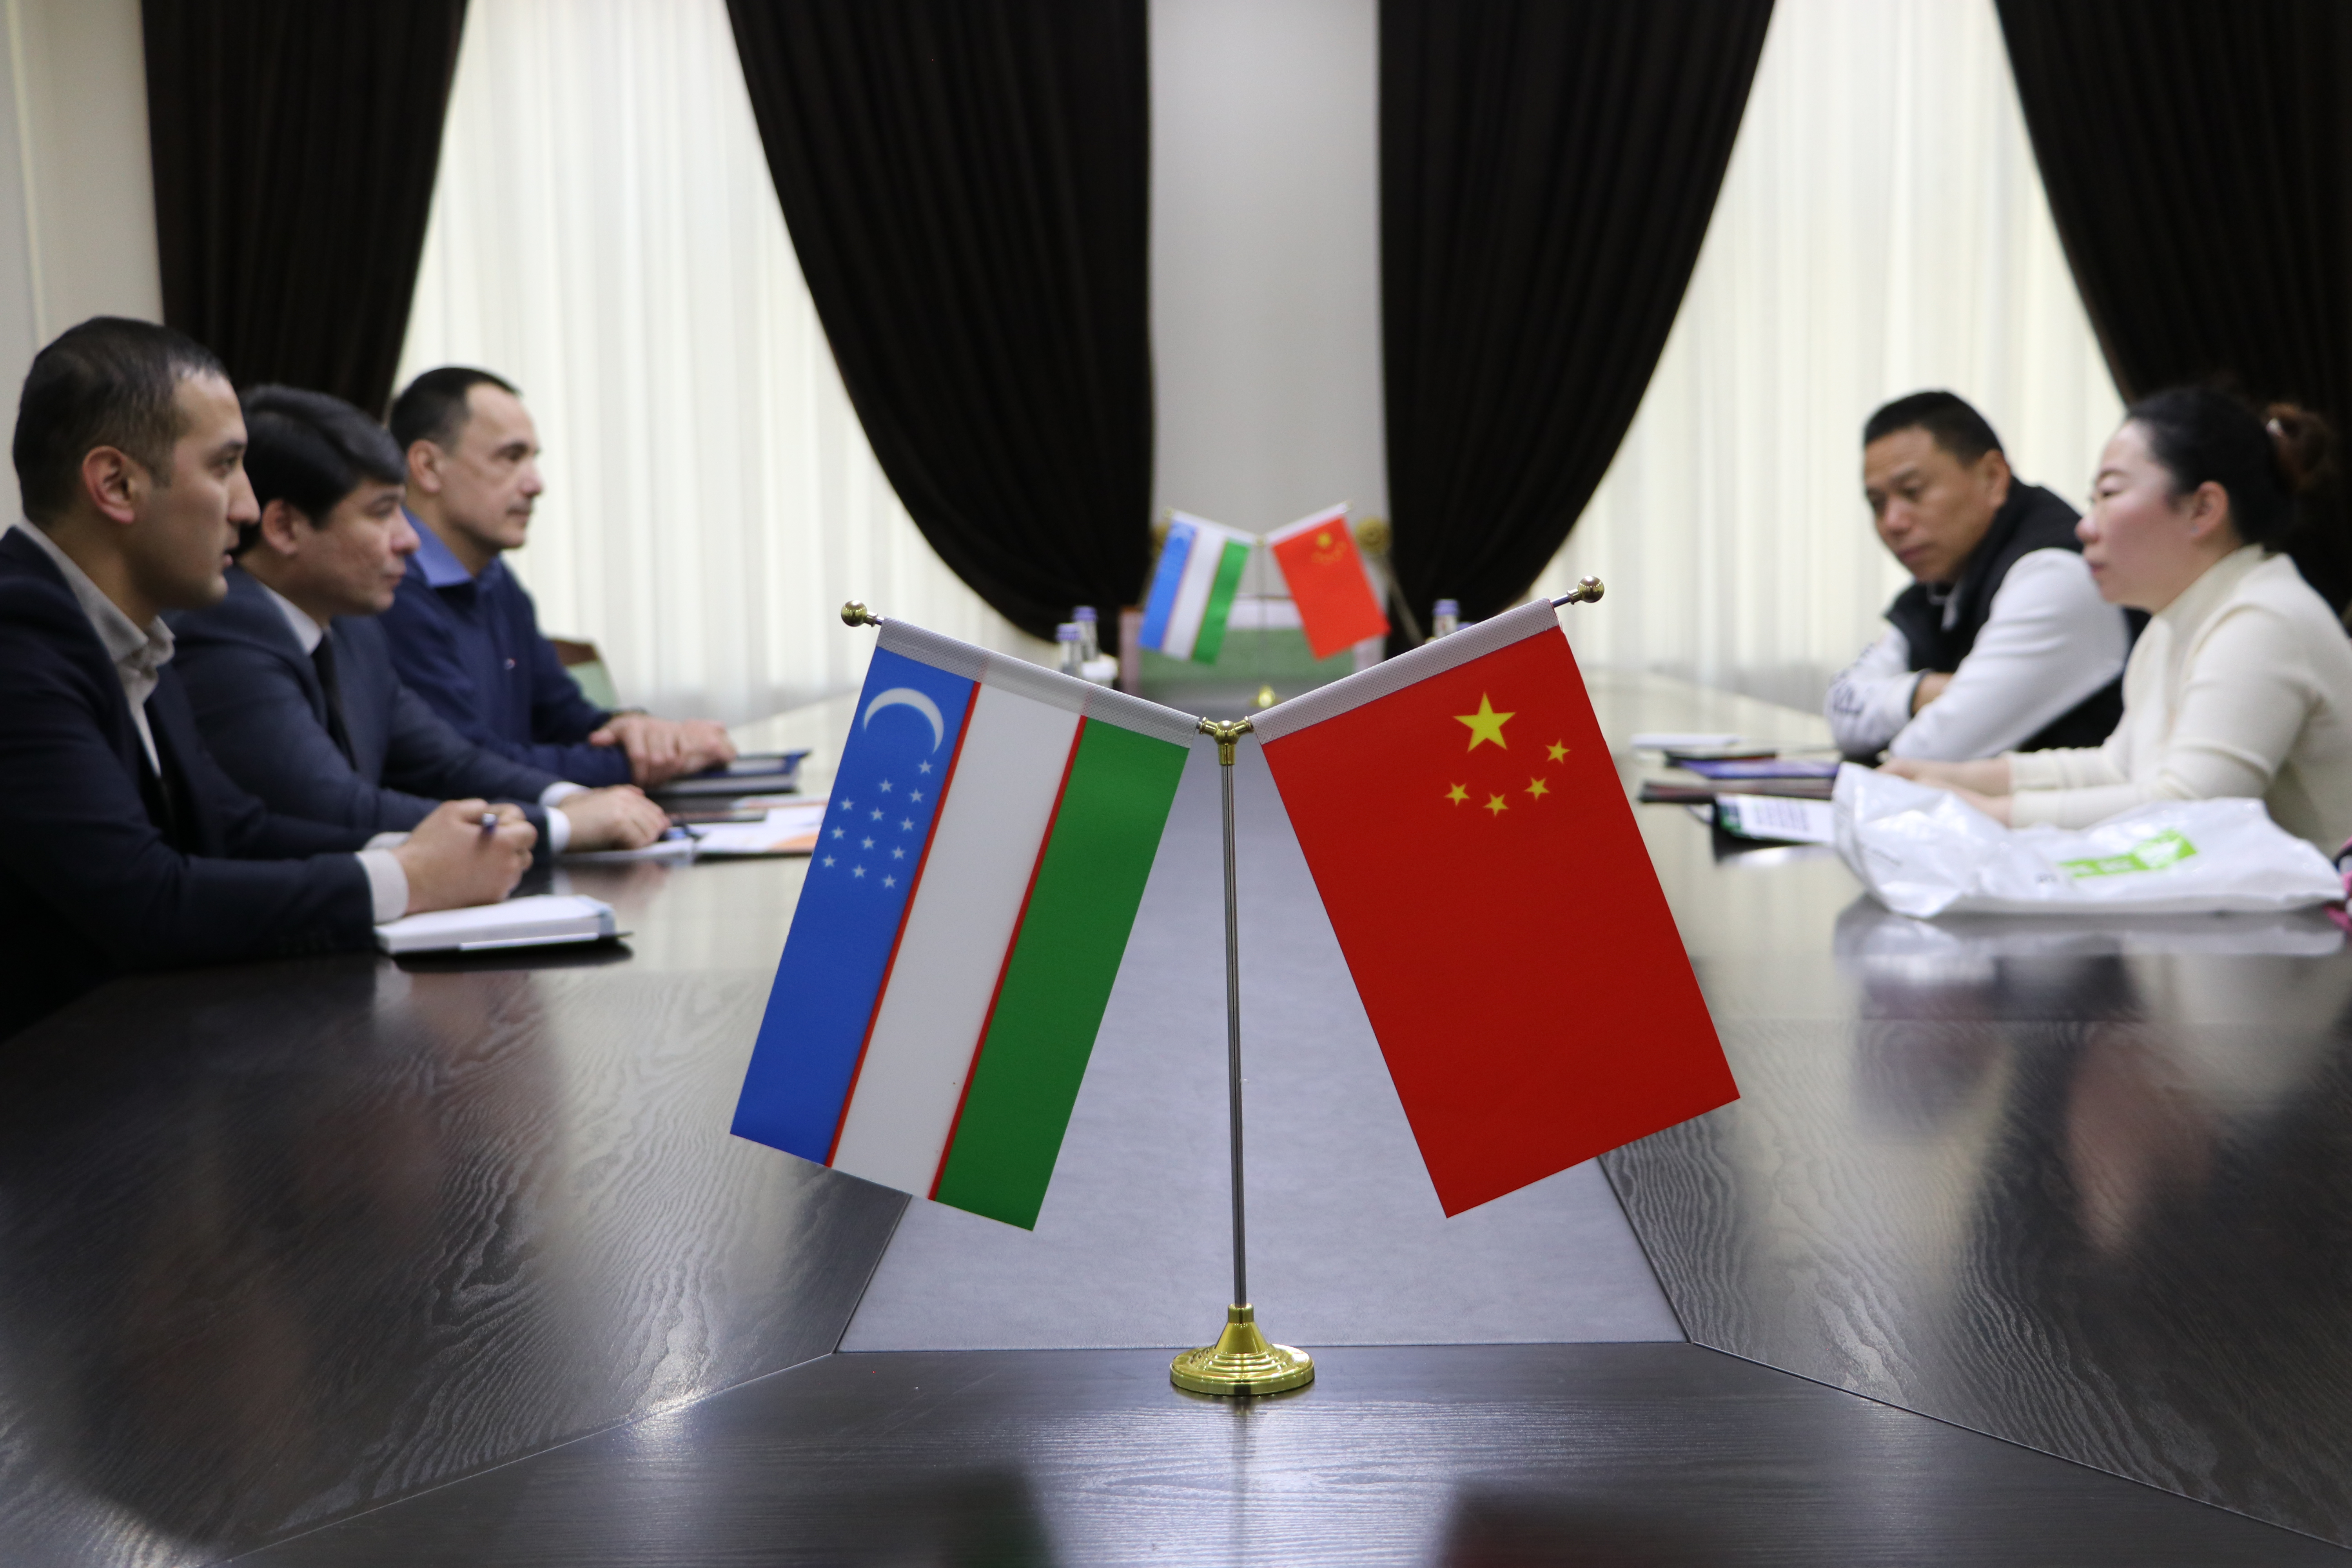 A COMPANY FROM CHINA IS INTERESTED IN COOPERATION WITH UZBEKISTAN